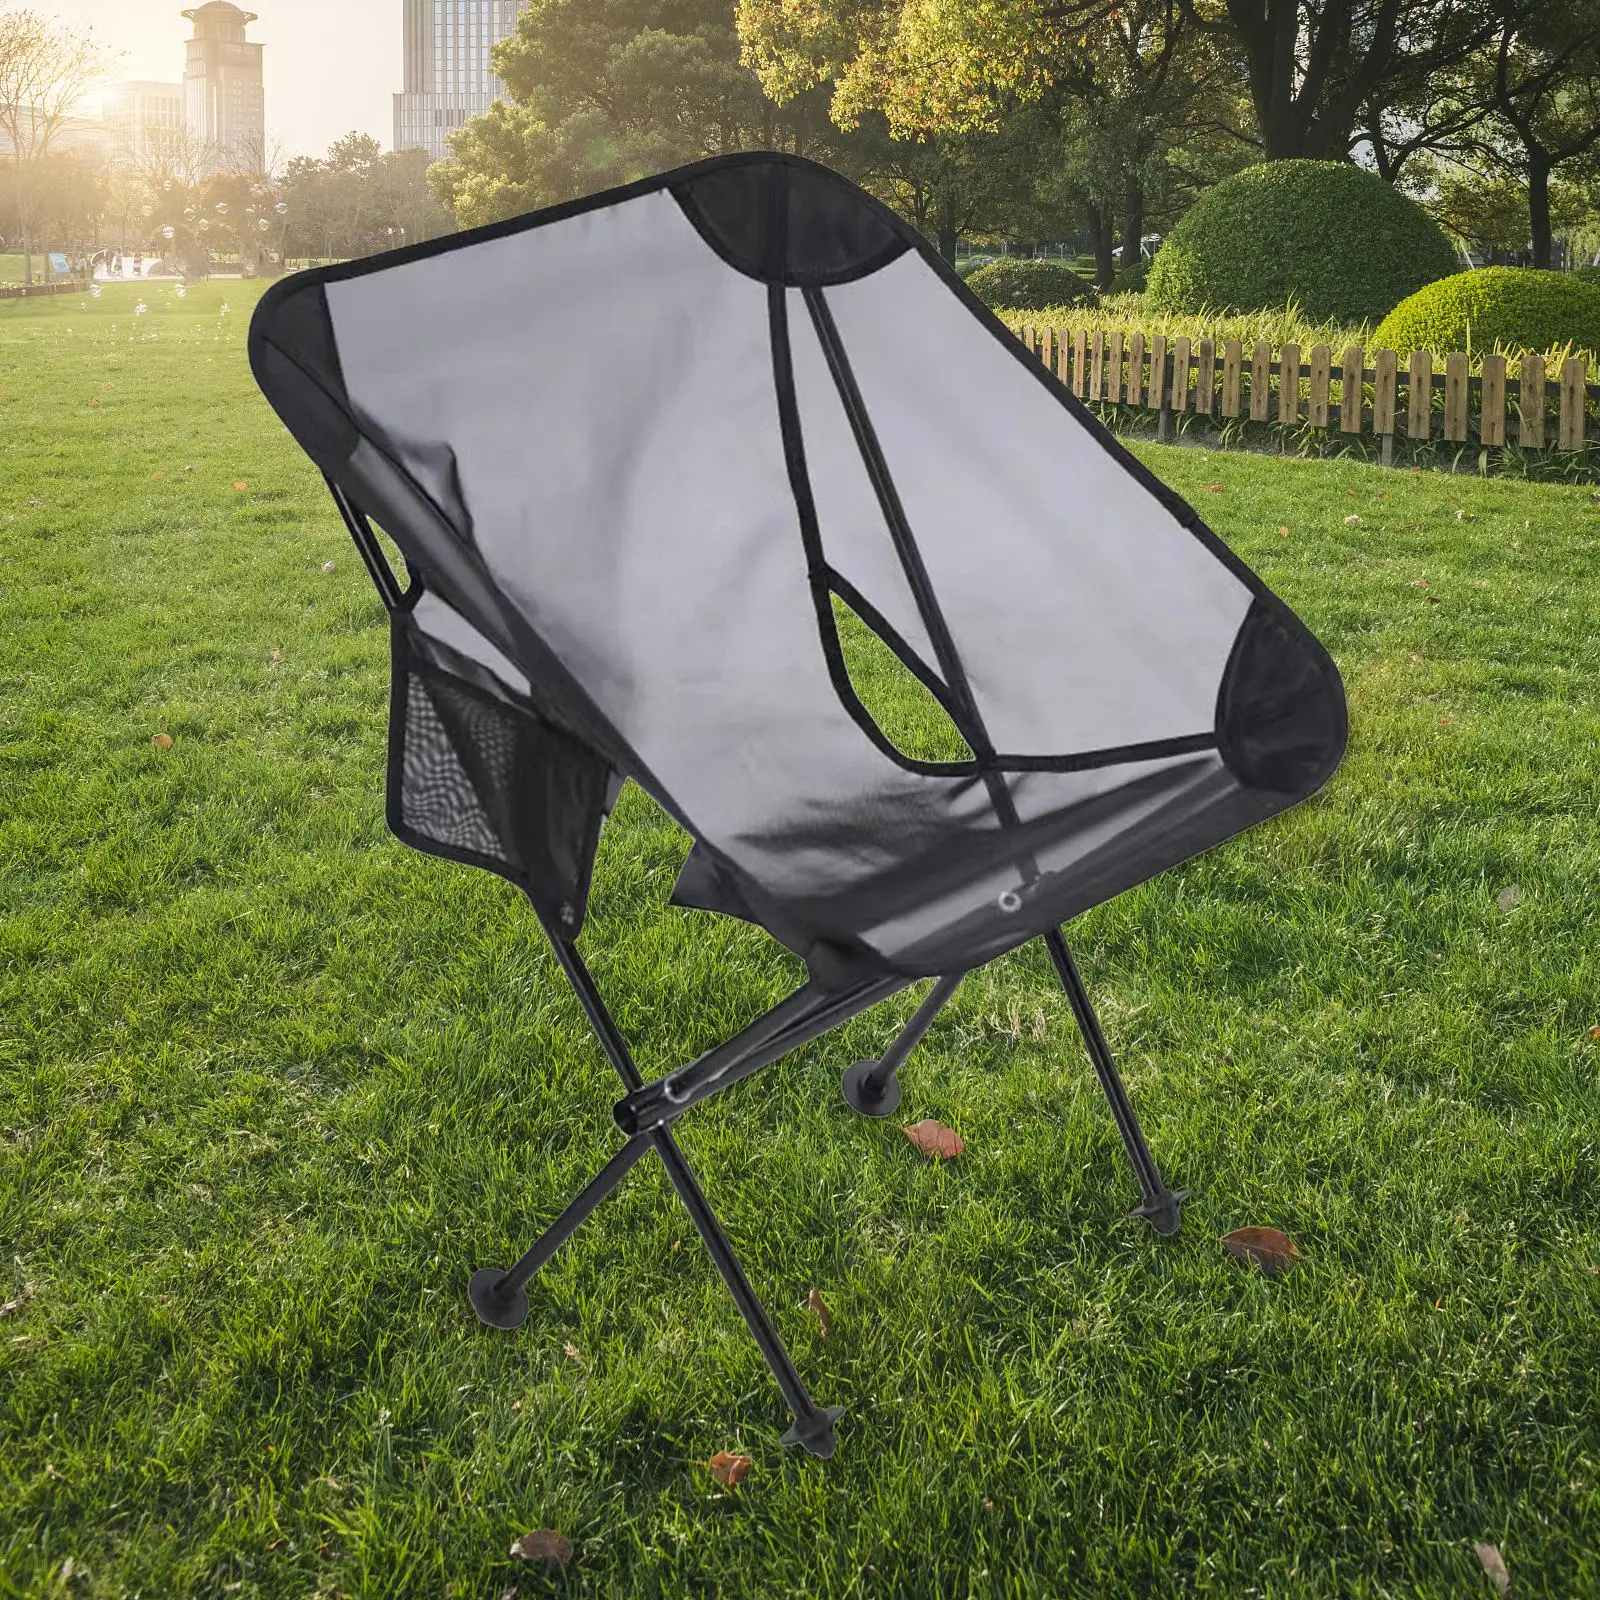 Folding Camping Chair Camping Picnic Chair for Outdoor Picnics Backyard Travels Hiking Park Folding Chair Outdoor Moon Chair